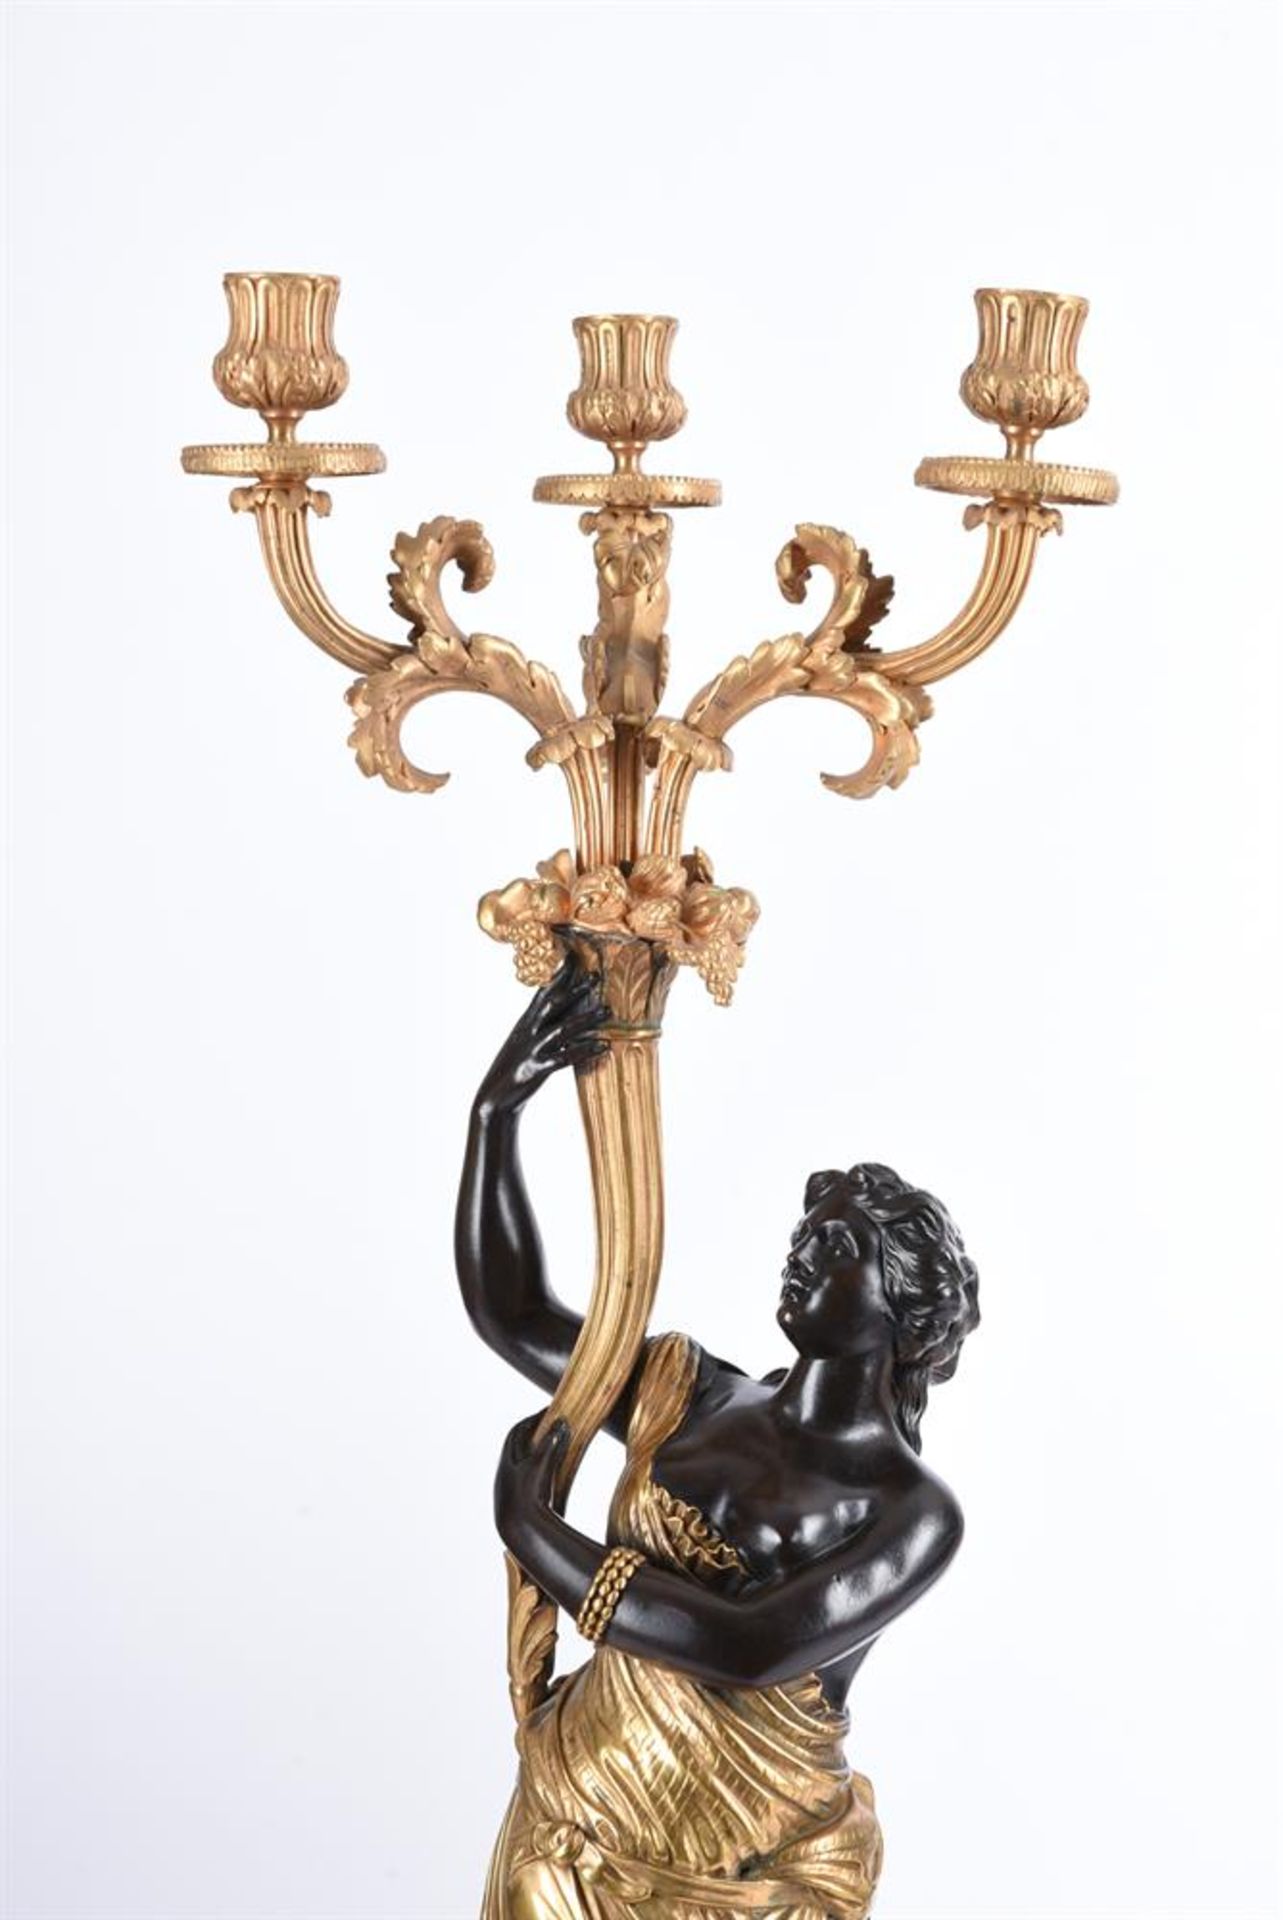 A PAIR OF ORMOLU AND PATINATED BRONZE THREE LIGHT CANDELABRA, LATE 19TH/EARLY 20TH CENTURY - Image 5 of 6